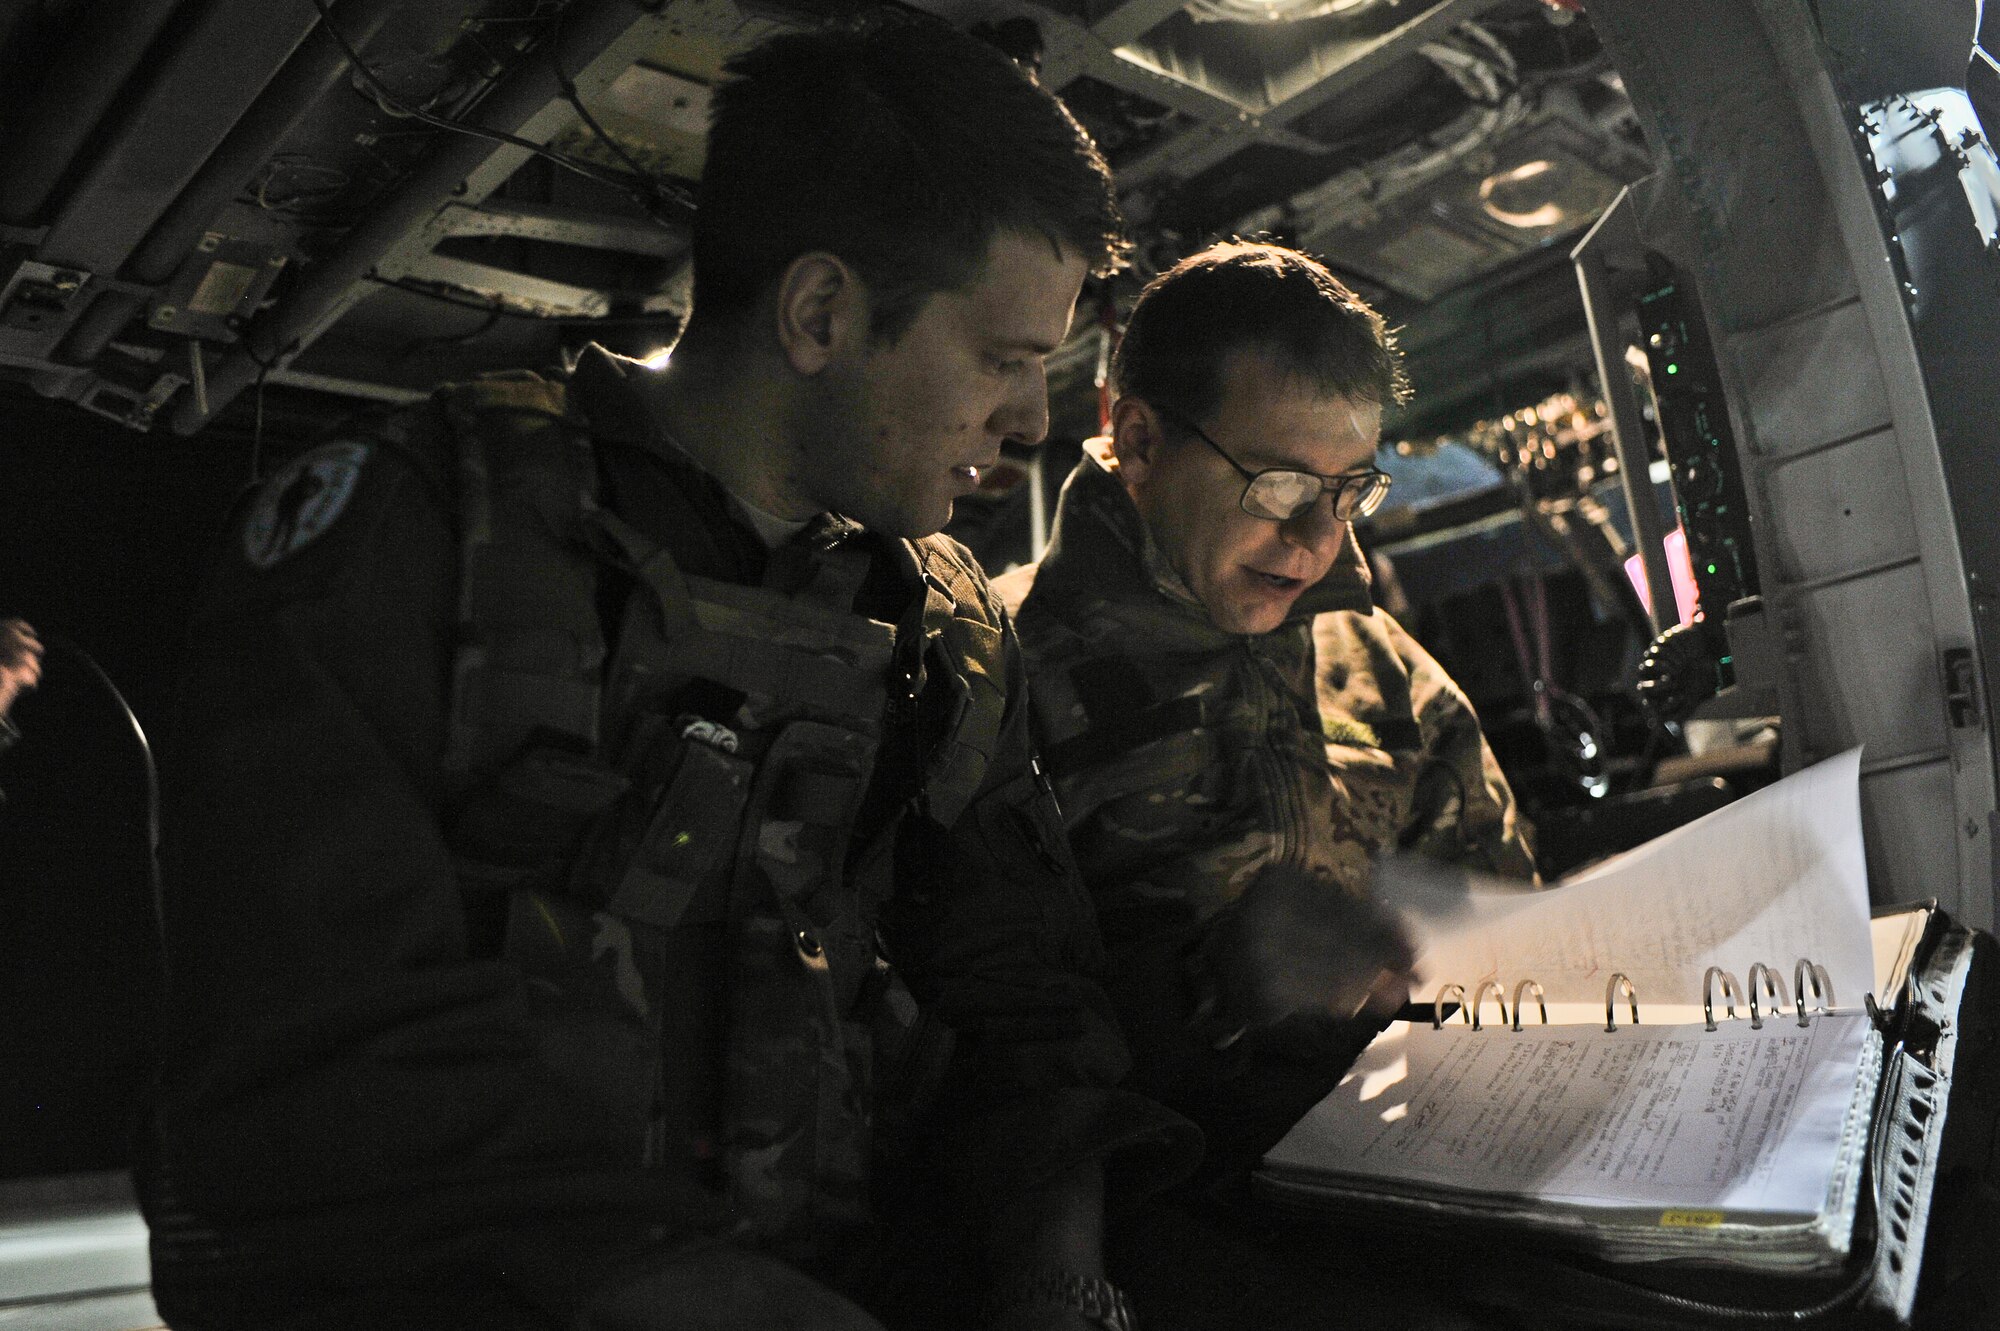 Capt Robert Louder, 66th Rescue Squadron HH-60G Pave Hawk pilot and Airman 1st Class Daniel Cowan, 66th RQS flight engineer prepare for a mission over the Nevada Test and Training Range, Nev. Feb. 5, 2015. Search and rescue operations during Red Flag improve efficiency and readiness for future real world operations. The night missions present the additional challenge of low visibility, testing aircrew’s ability to execute the mission at any hour in a contested and degraded environment. (U.S. Air Force photo by Staff Sgt. Darlene Seltmann)